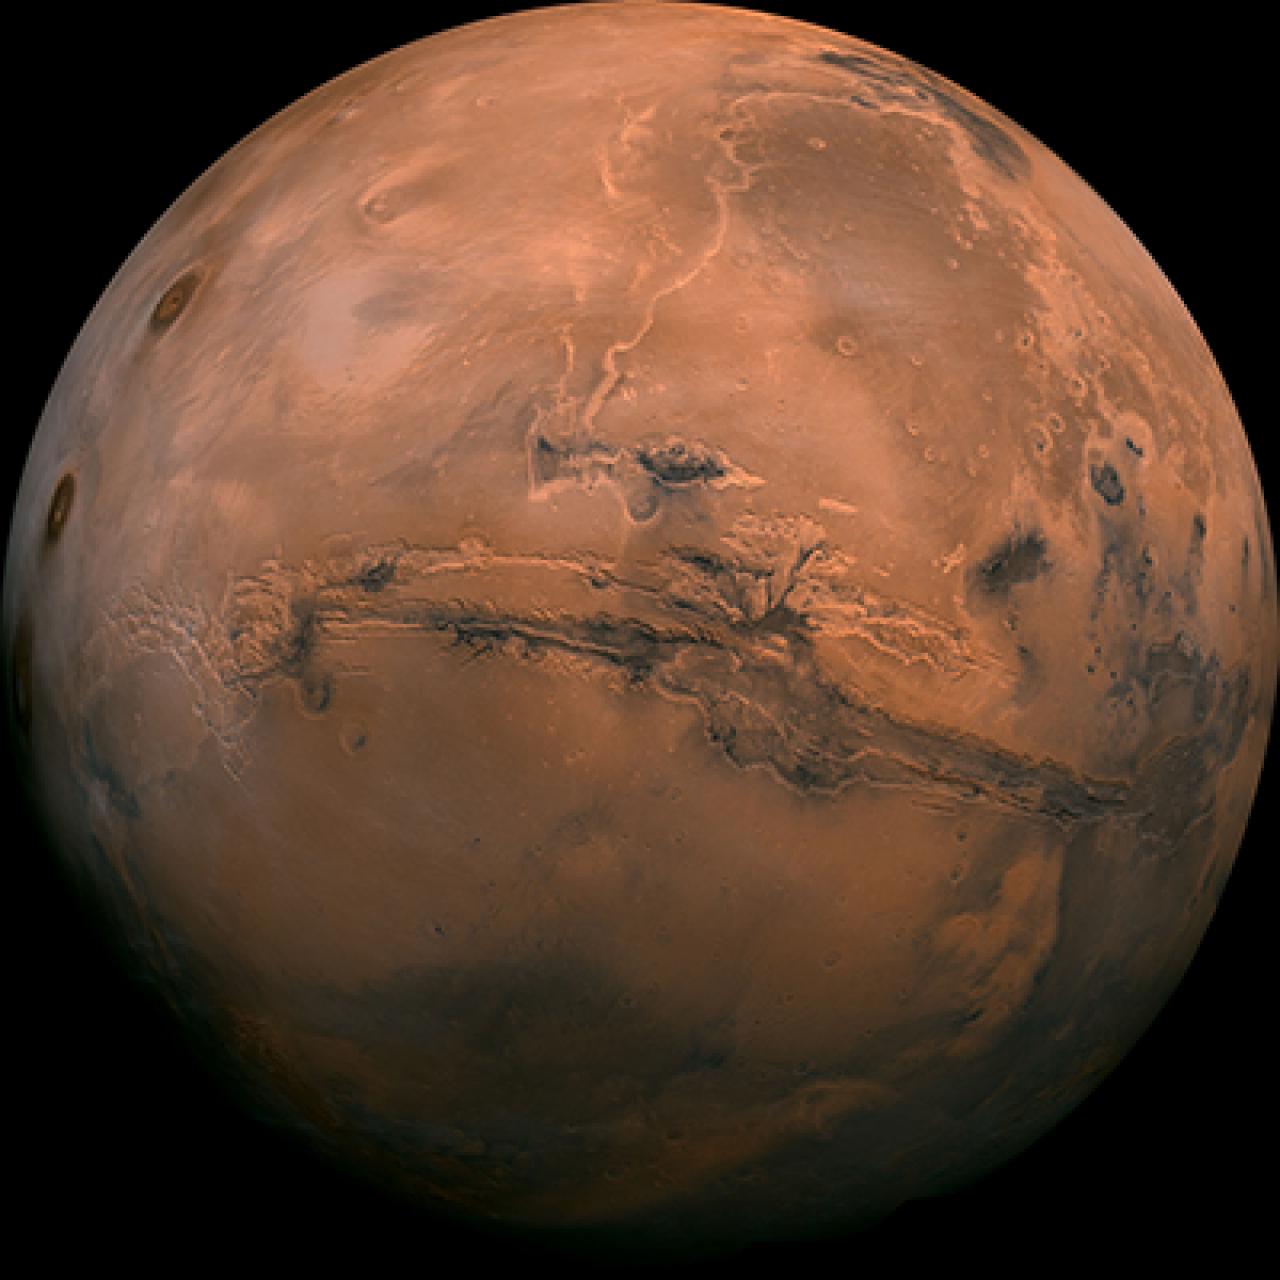 Evidence for Water on Mars Might be Clay Instead